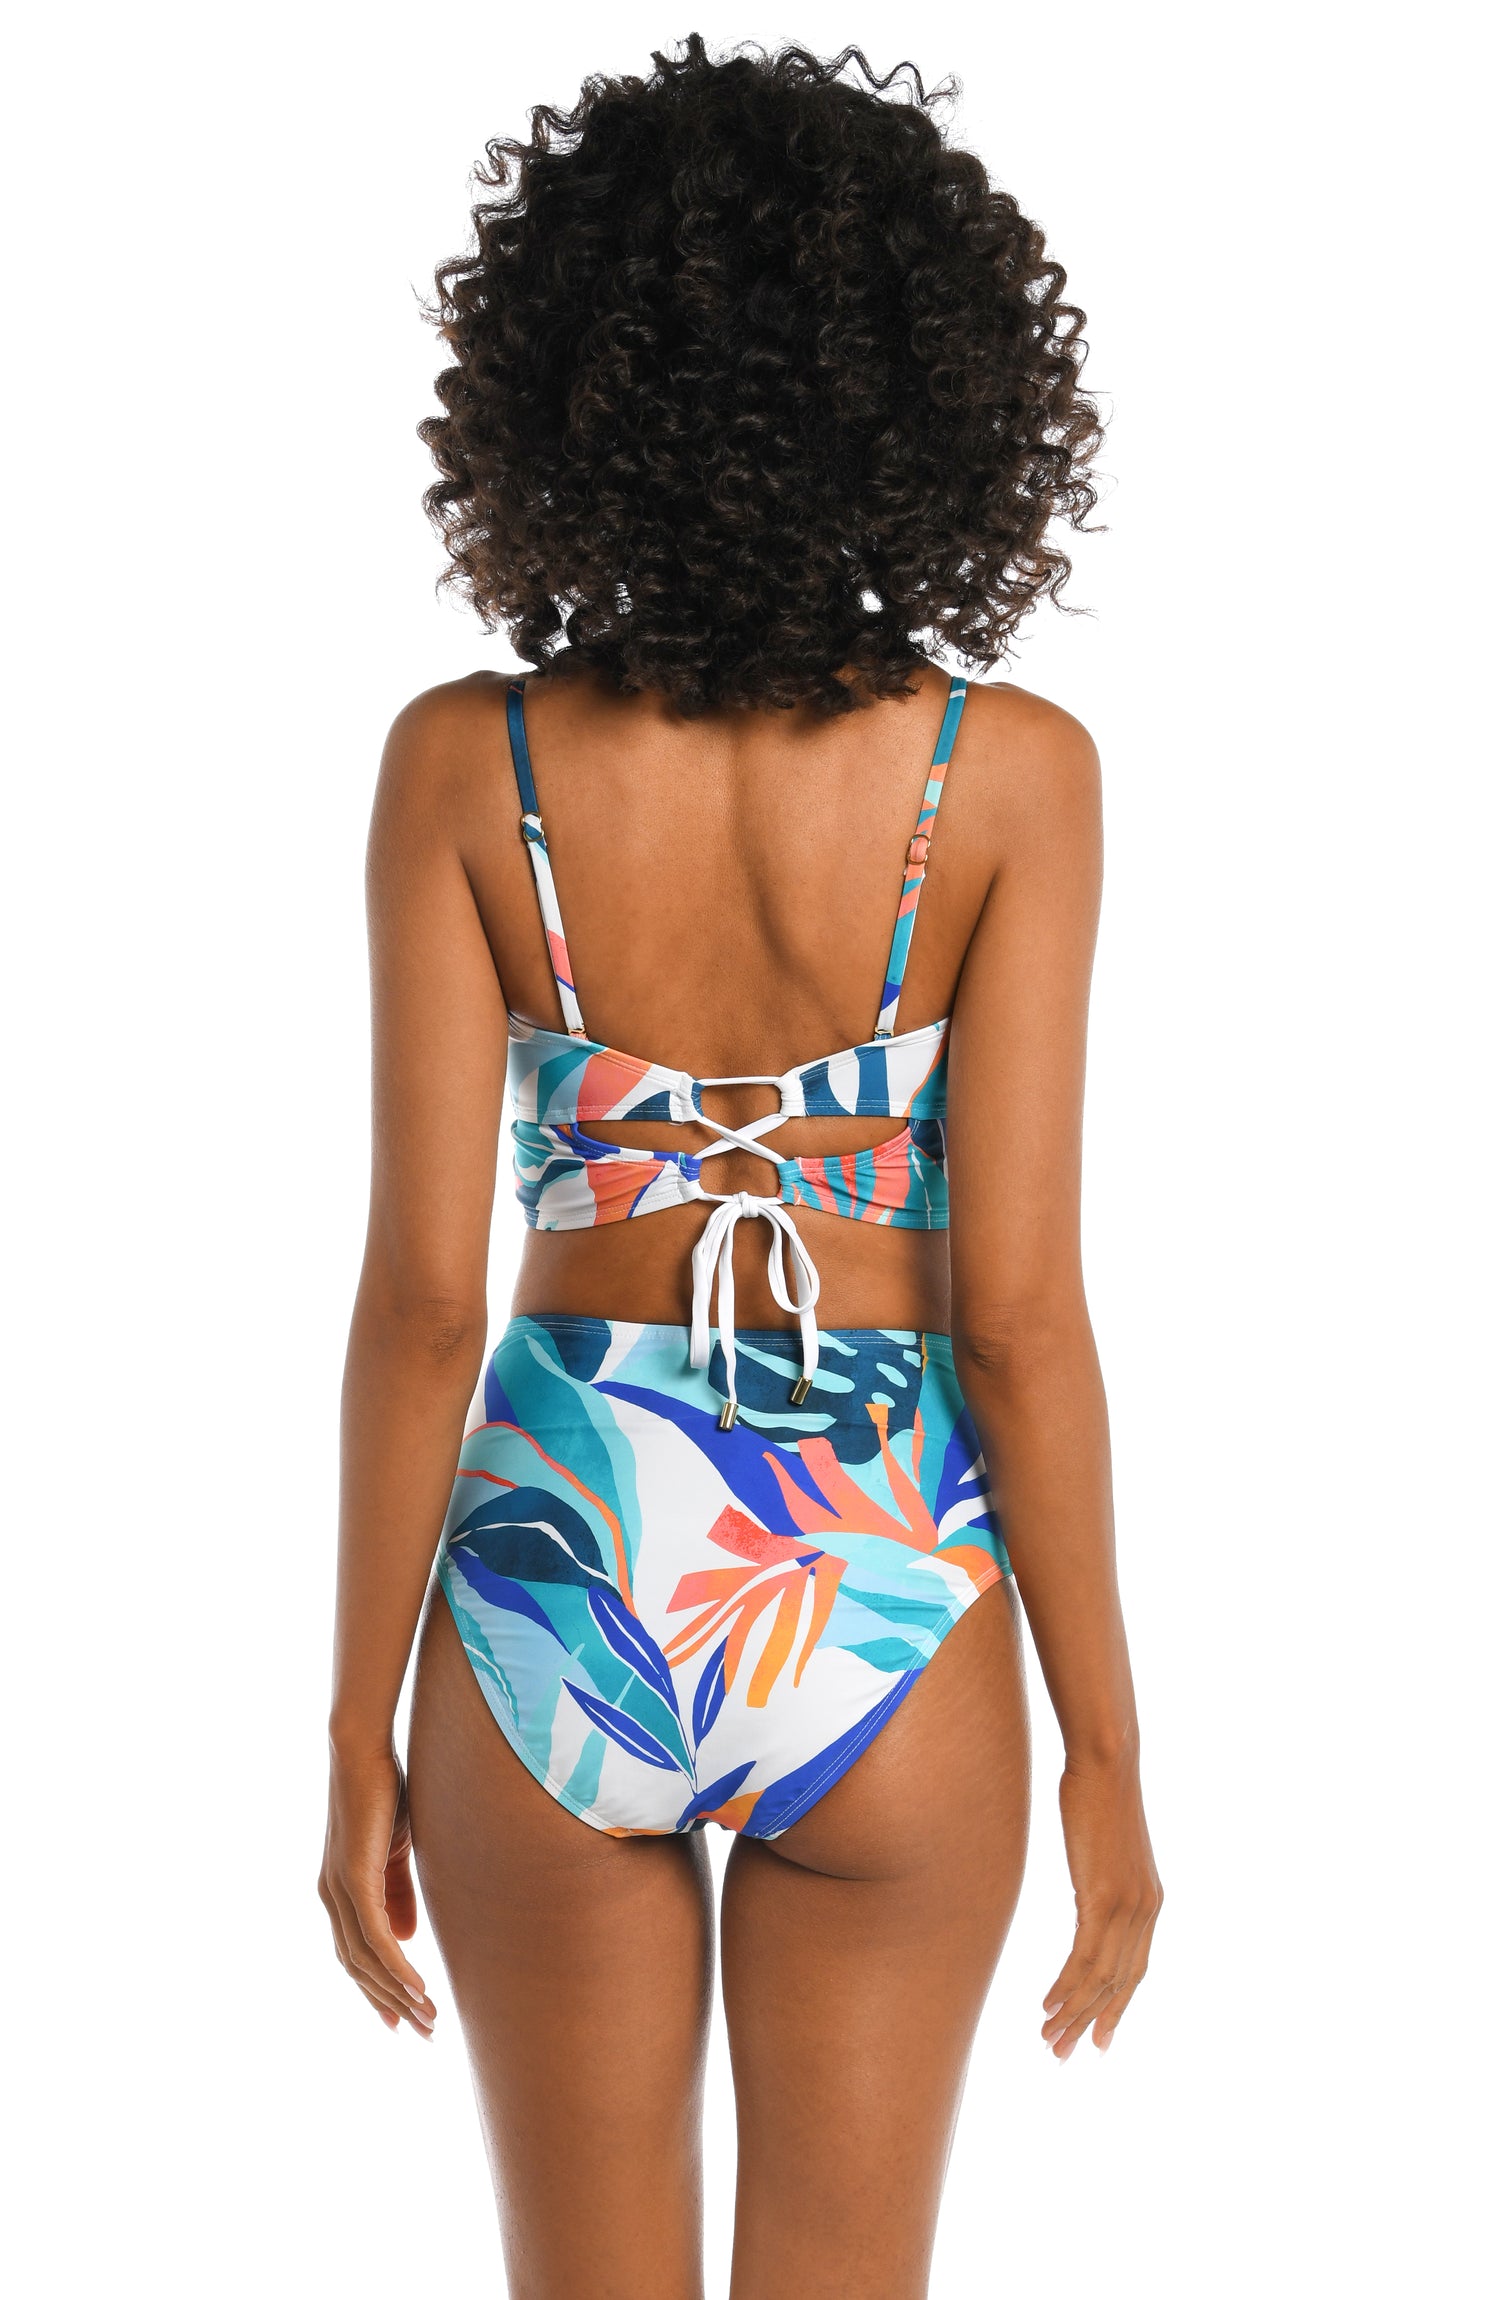 Model is wearing a blue multi colored tropical printed midkini top from our Coastal Palms collection!